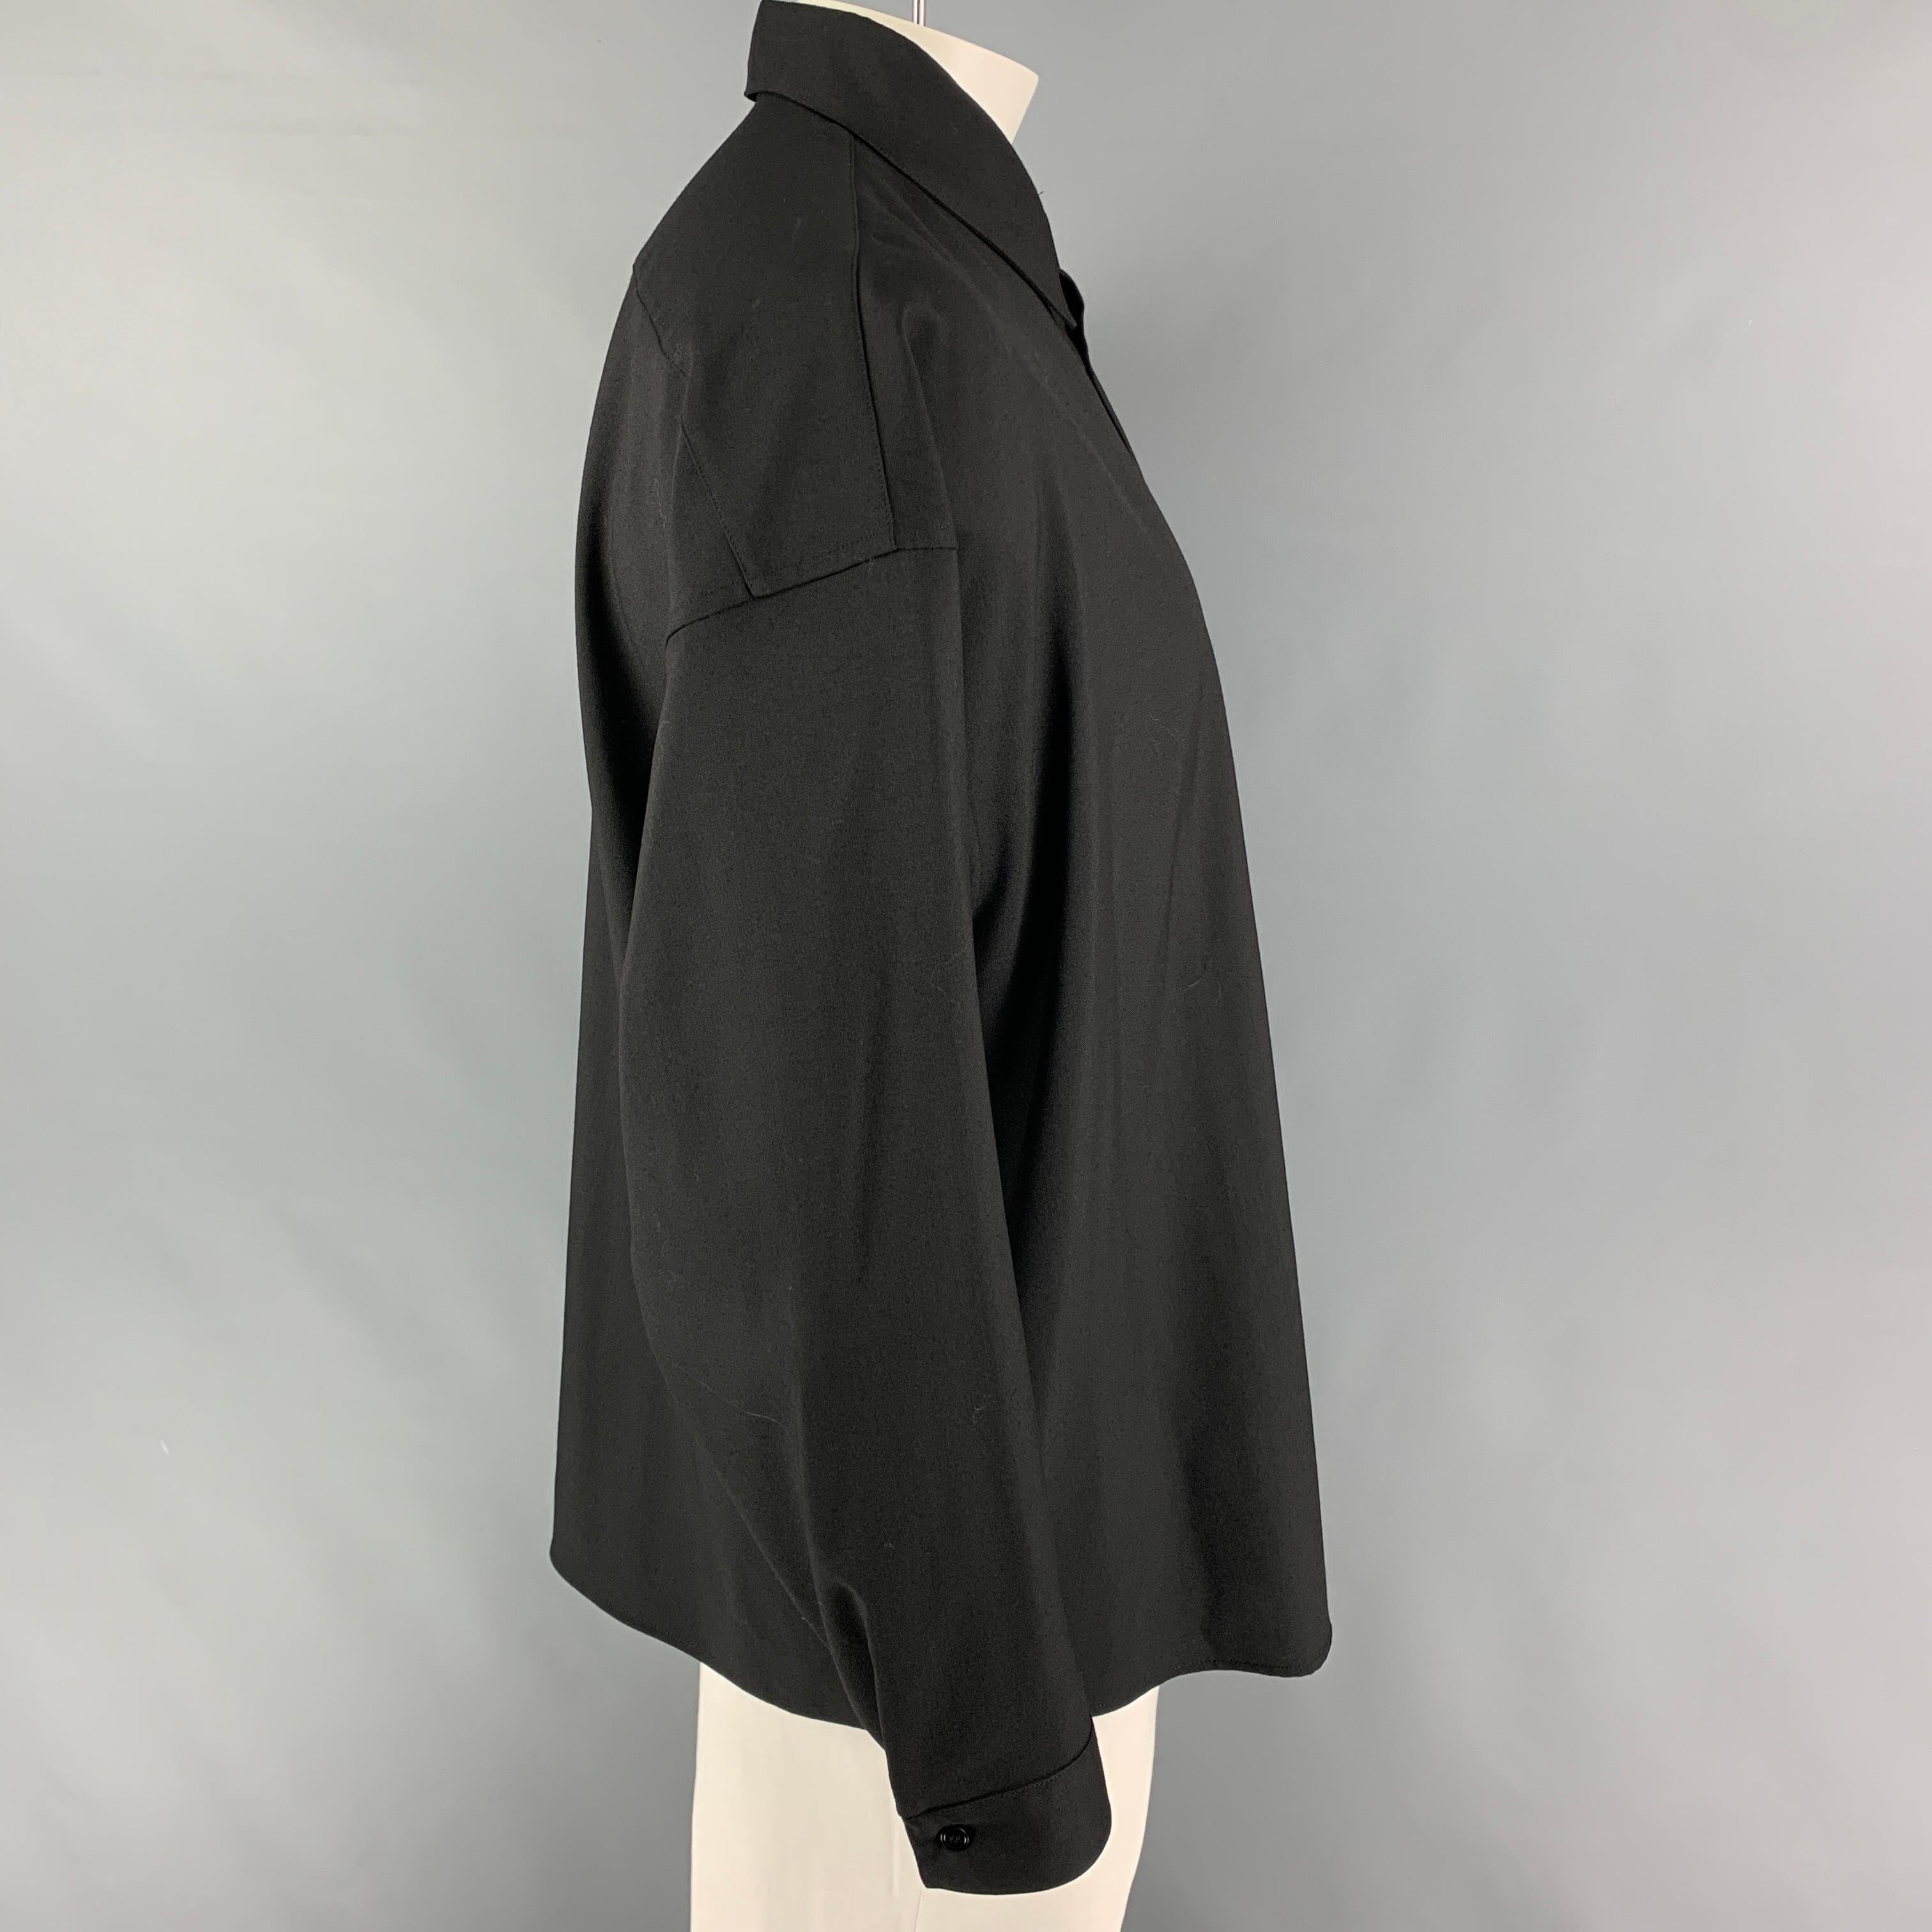 MARNI long sleeve shirt comes in a black virgin wool featuring a oversized fit, pointed collar, patch pocket, and a button up closure. Made in Italy.

Very Good Pre-Owned Condition.
Marked: 50

Measurements:

Shoulder: 27.5 in.
Chest: 54 in.
Sleeve: